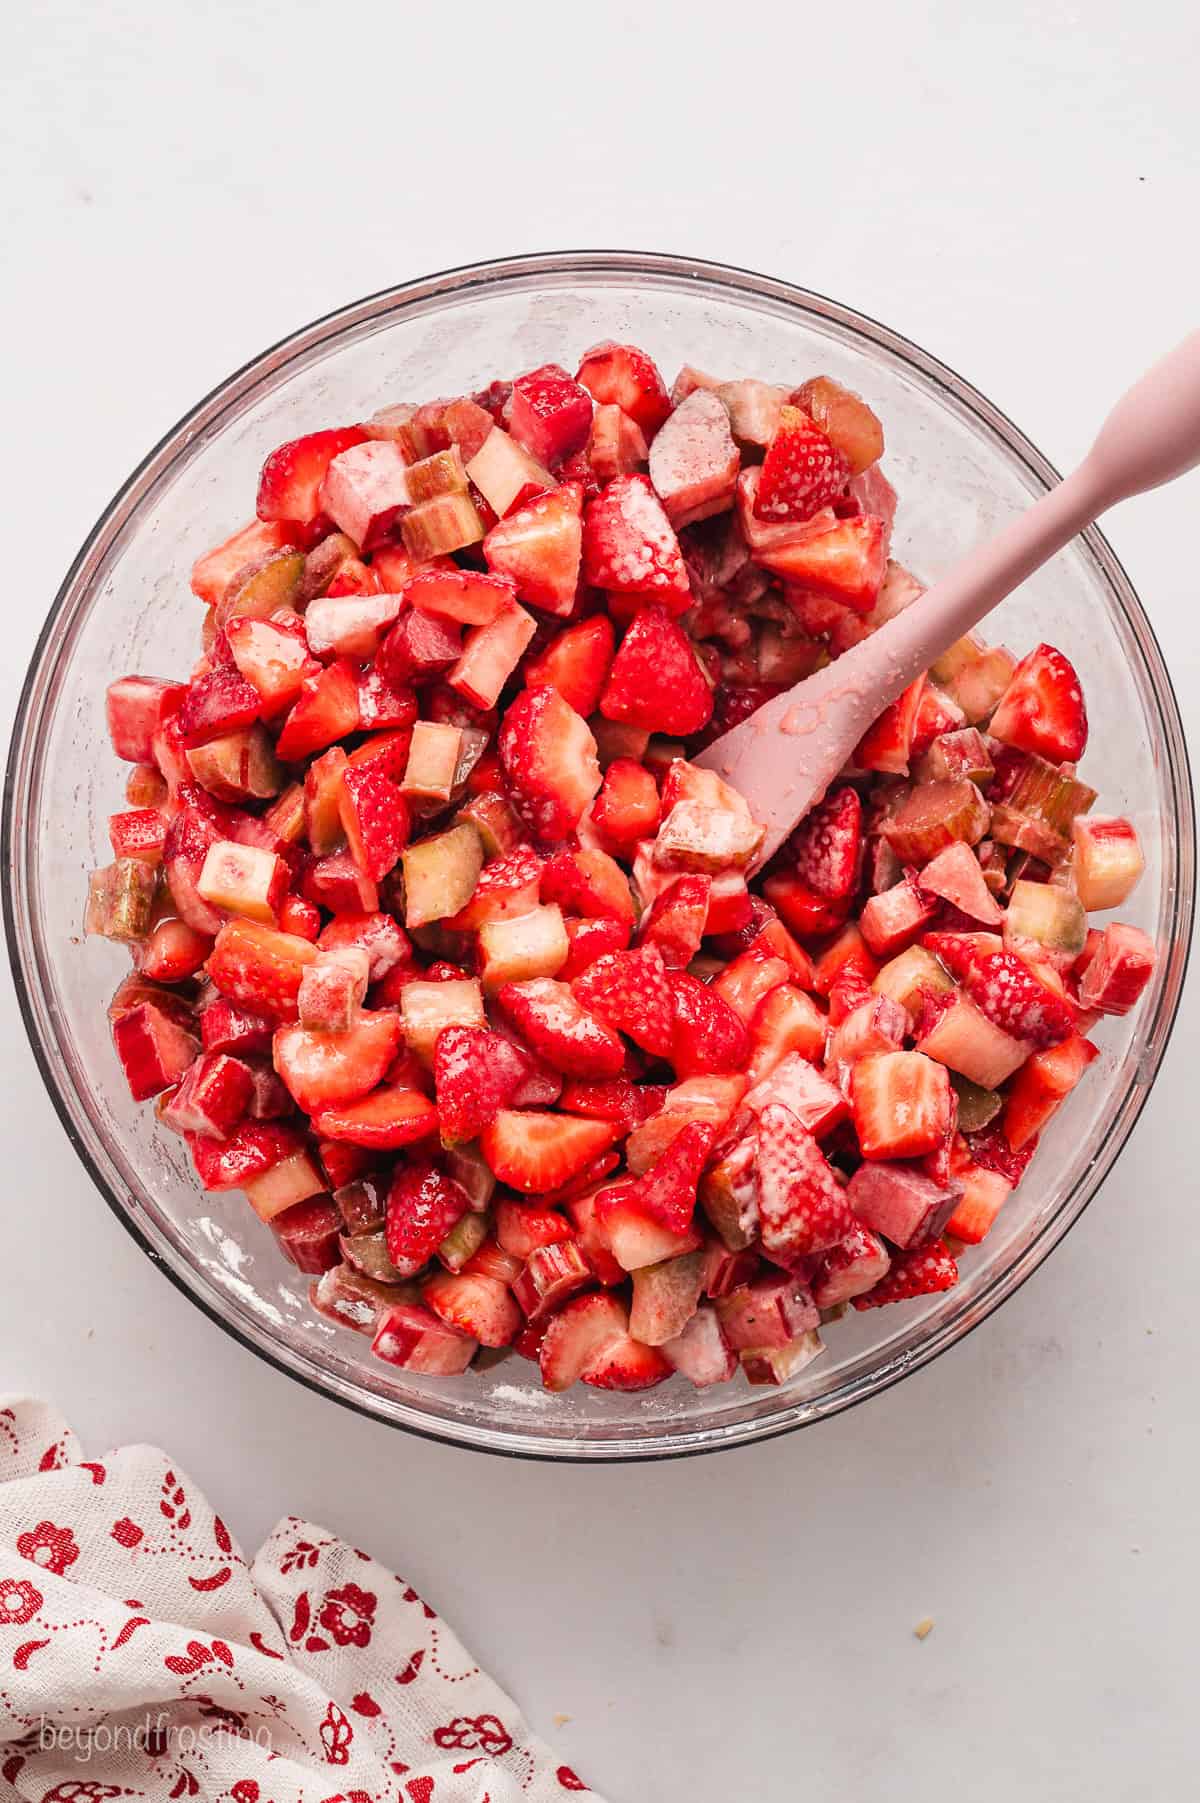 Diced strawberries and rhubarb combined in a glass bowl with a wooden spoon.